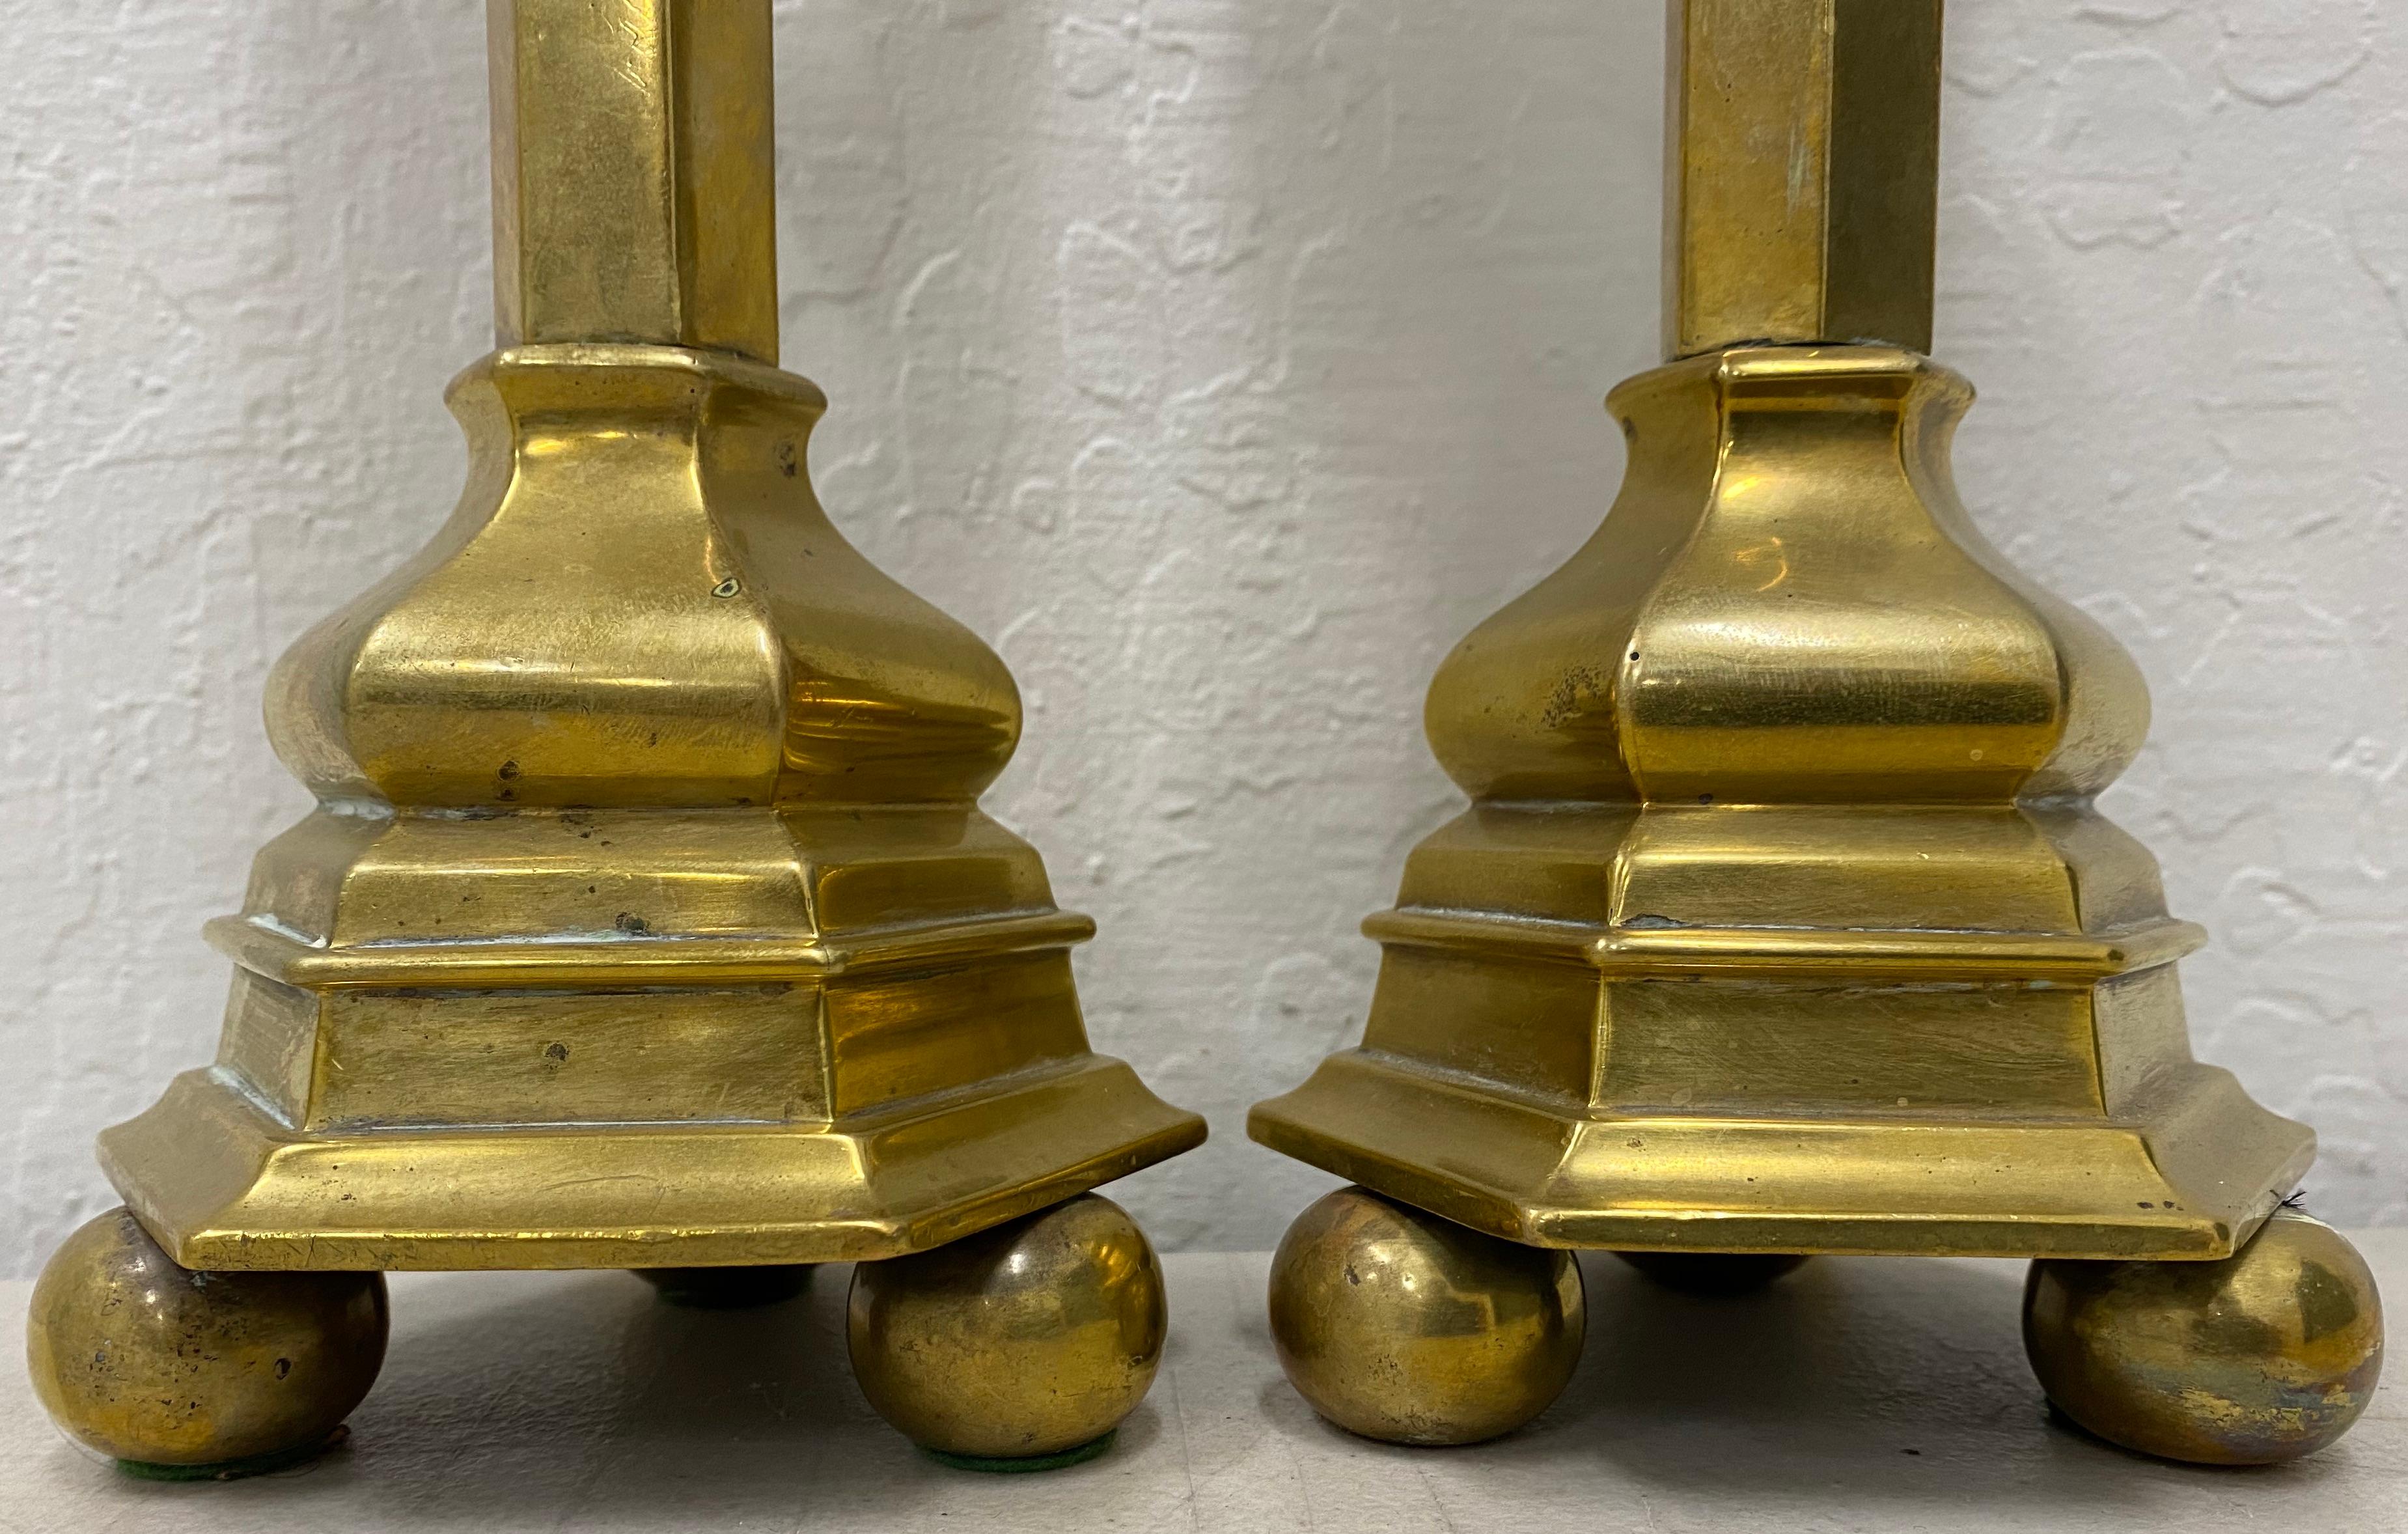 Cast Mid-19th Century Brass Oil Lamps Converted to Table Lamps For Sale